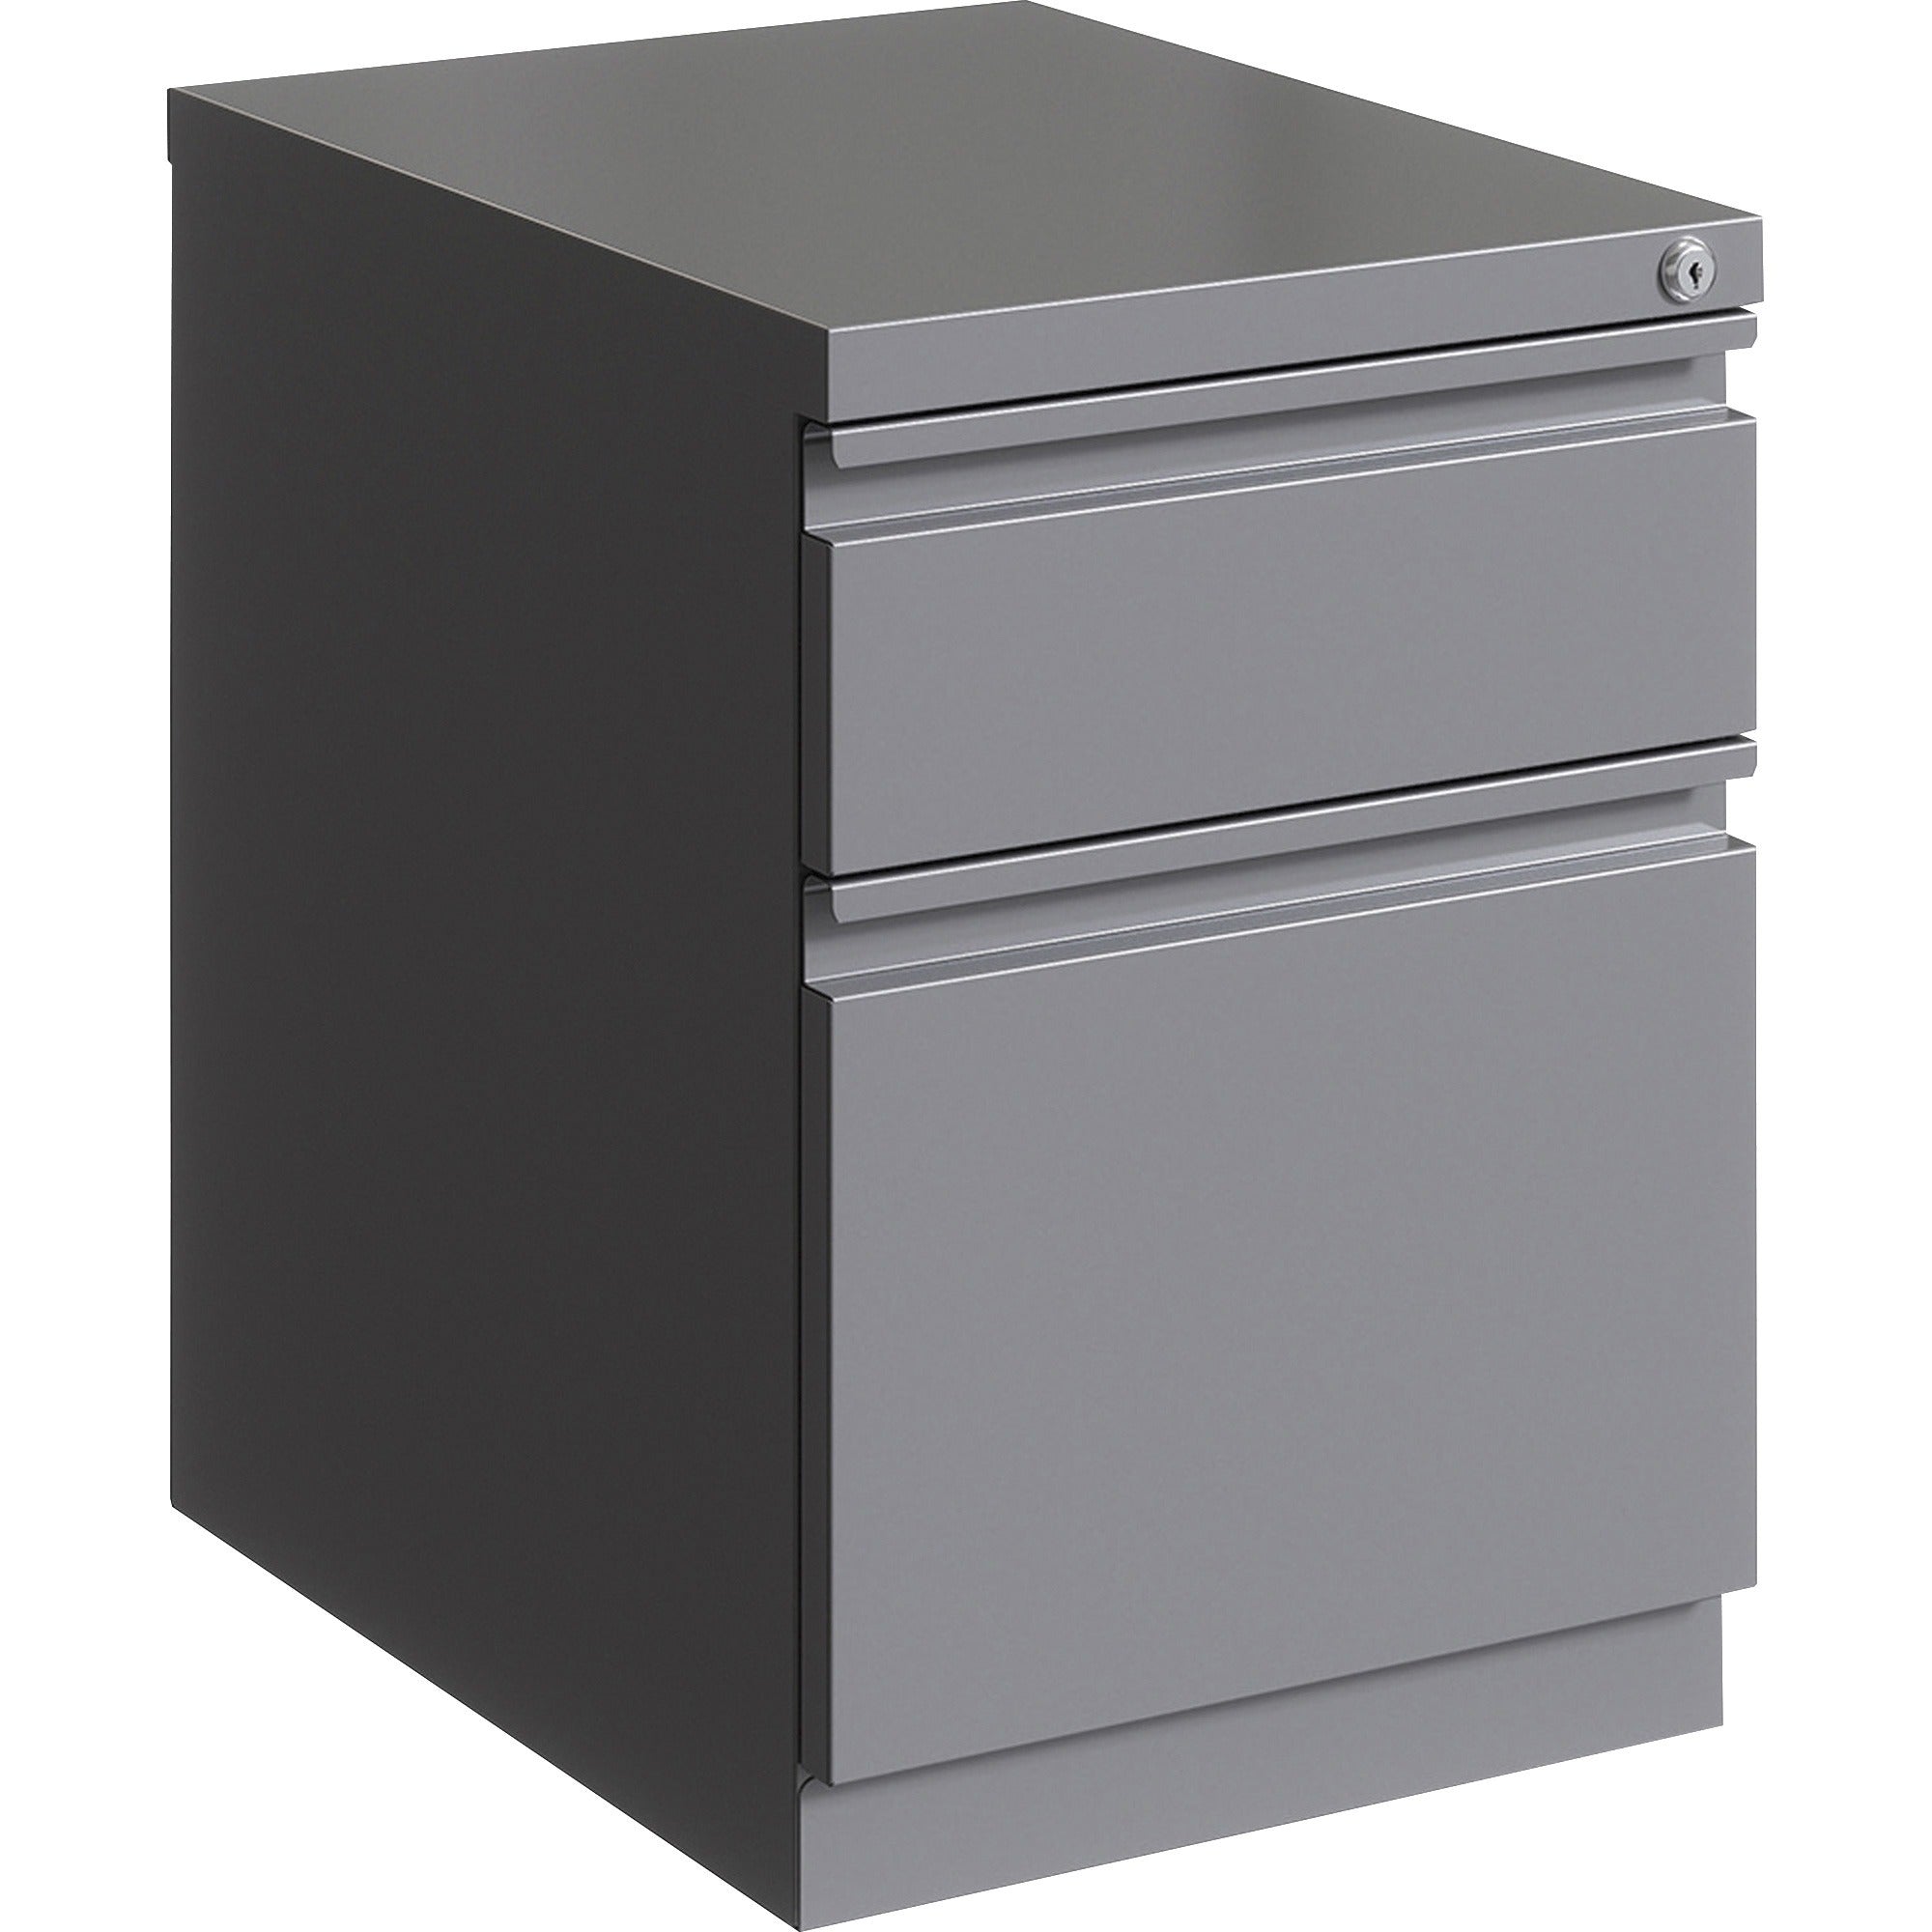 lorell-20-box-file-mobile-pedestal-15-x-199-x-238-for-box-file-letter-mobility-ball-bearing-suspension-removable-lock-pull-out-drawer-recessed-drawer-anti-tip-casters-key-lock-silver-steel-recycled_llr00054 - 1